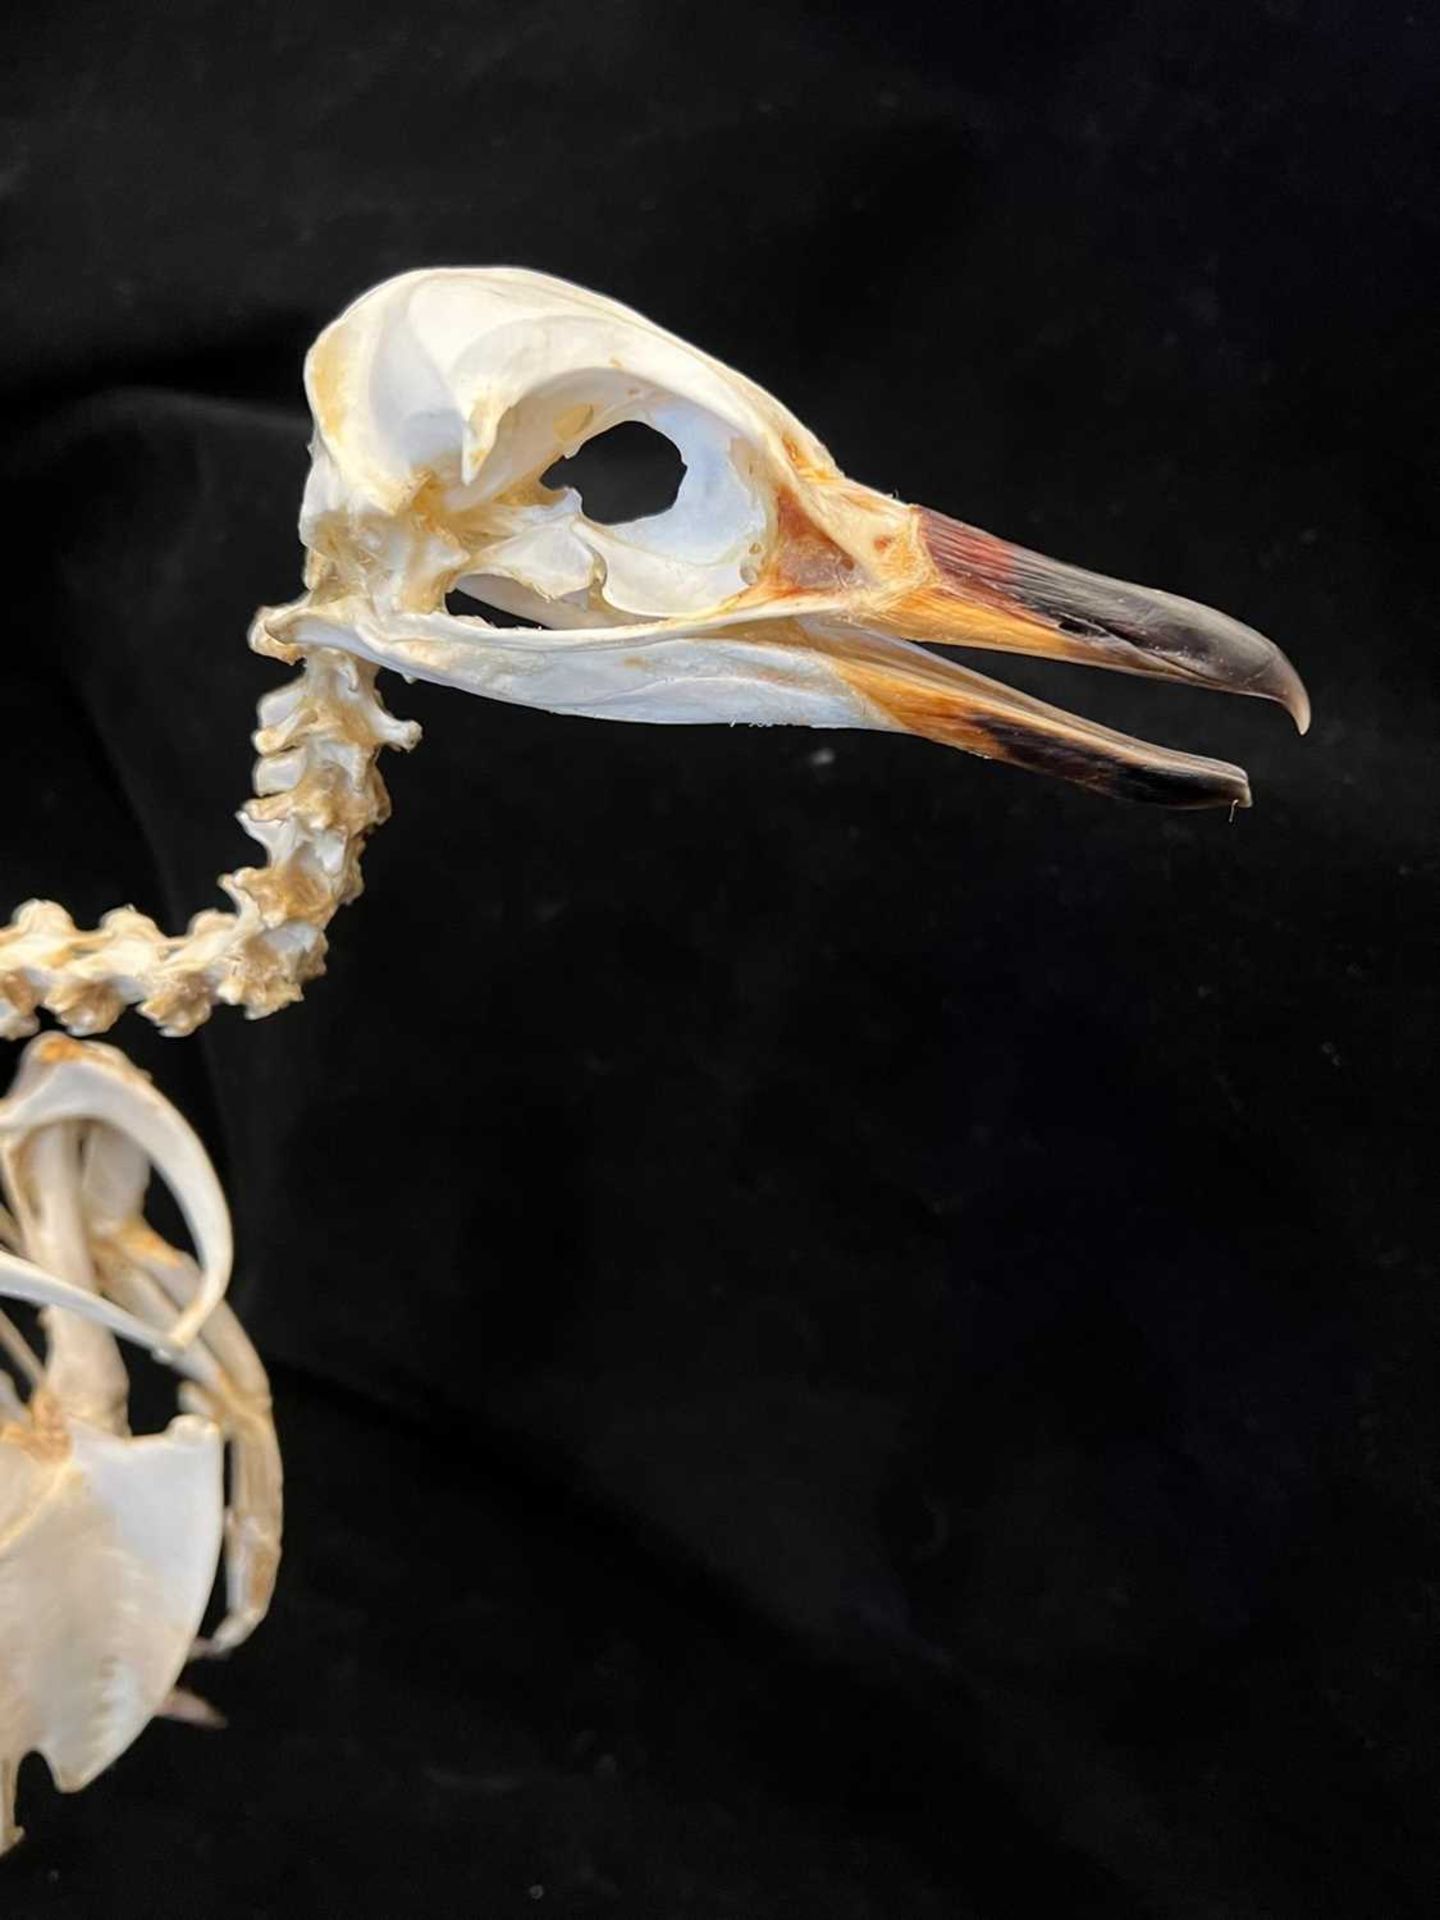 A TAXIDERMY / OSTEOLOGY PENGUIN SKELETON. - Image 5 of 8